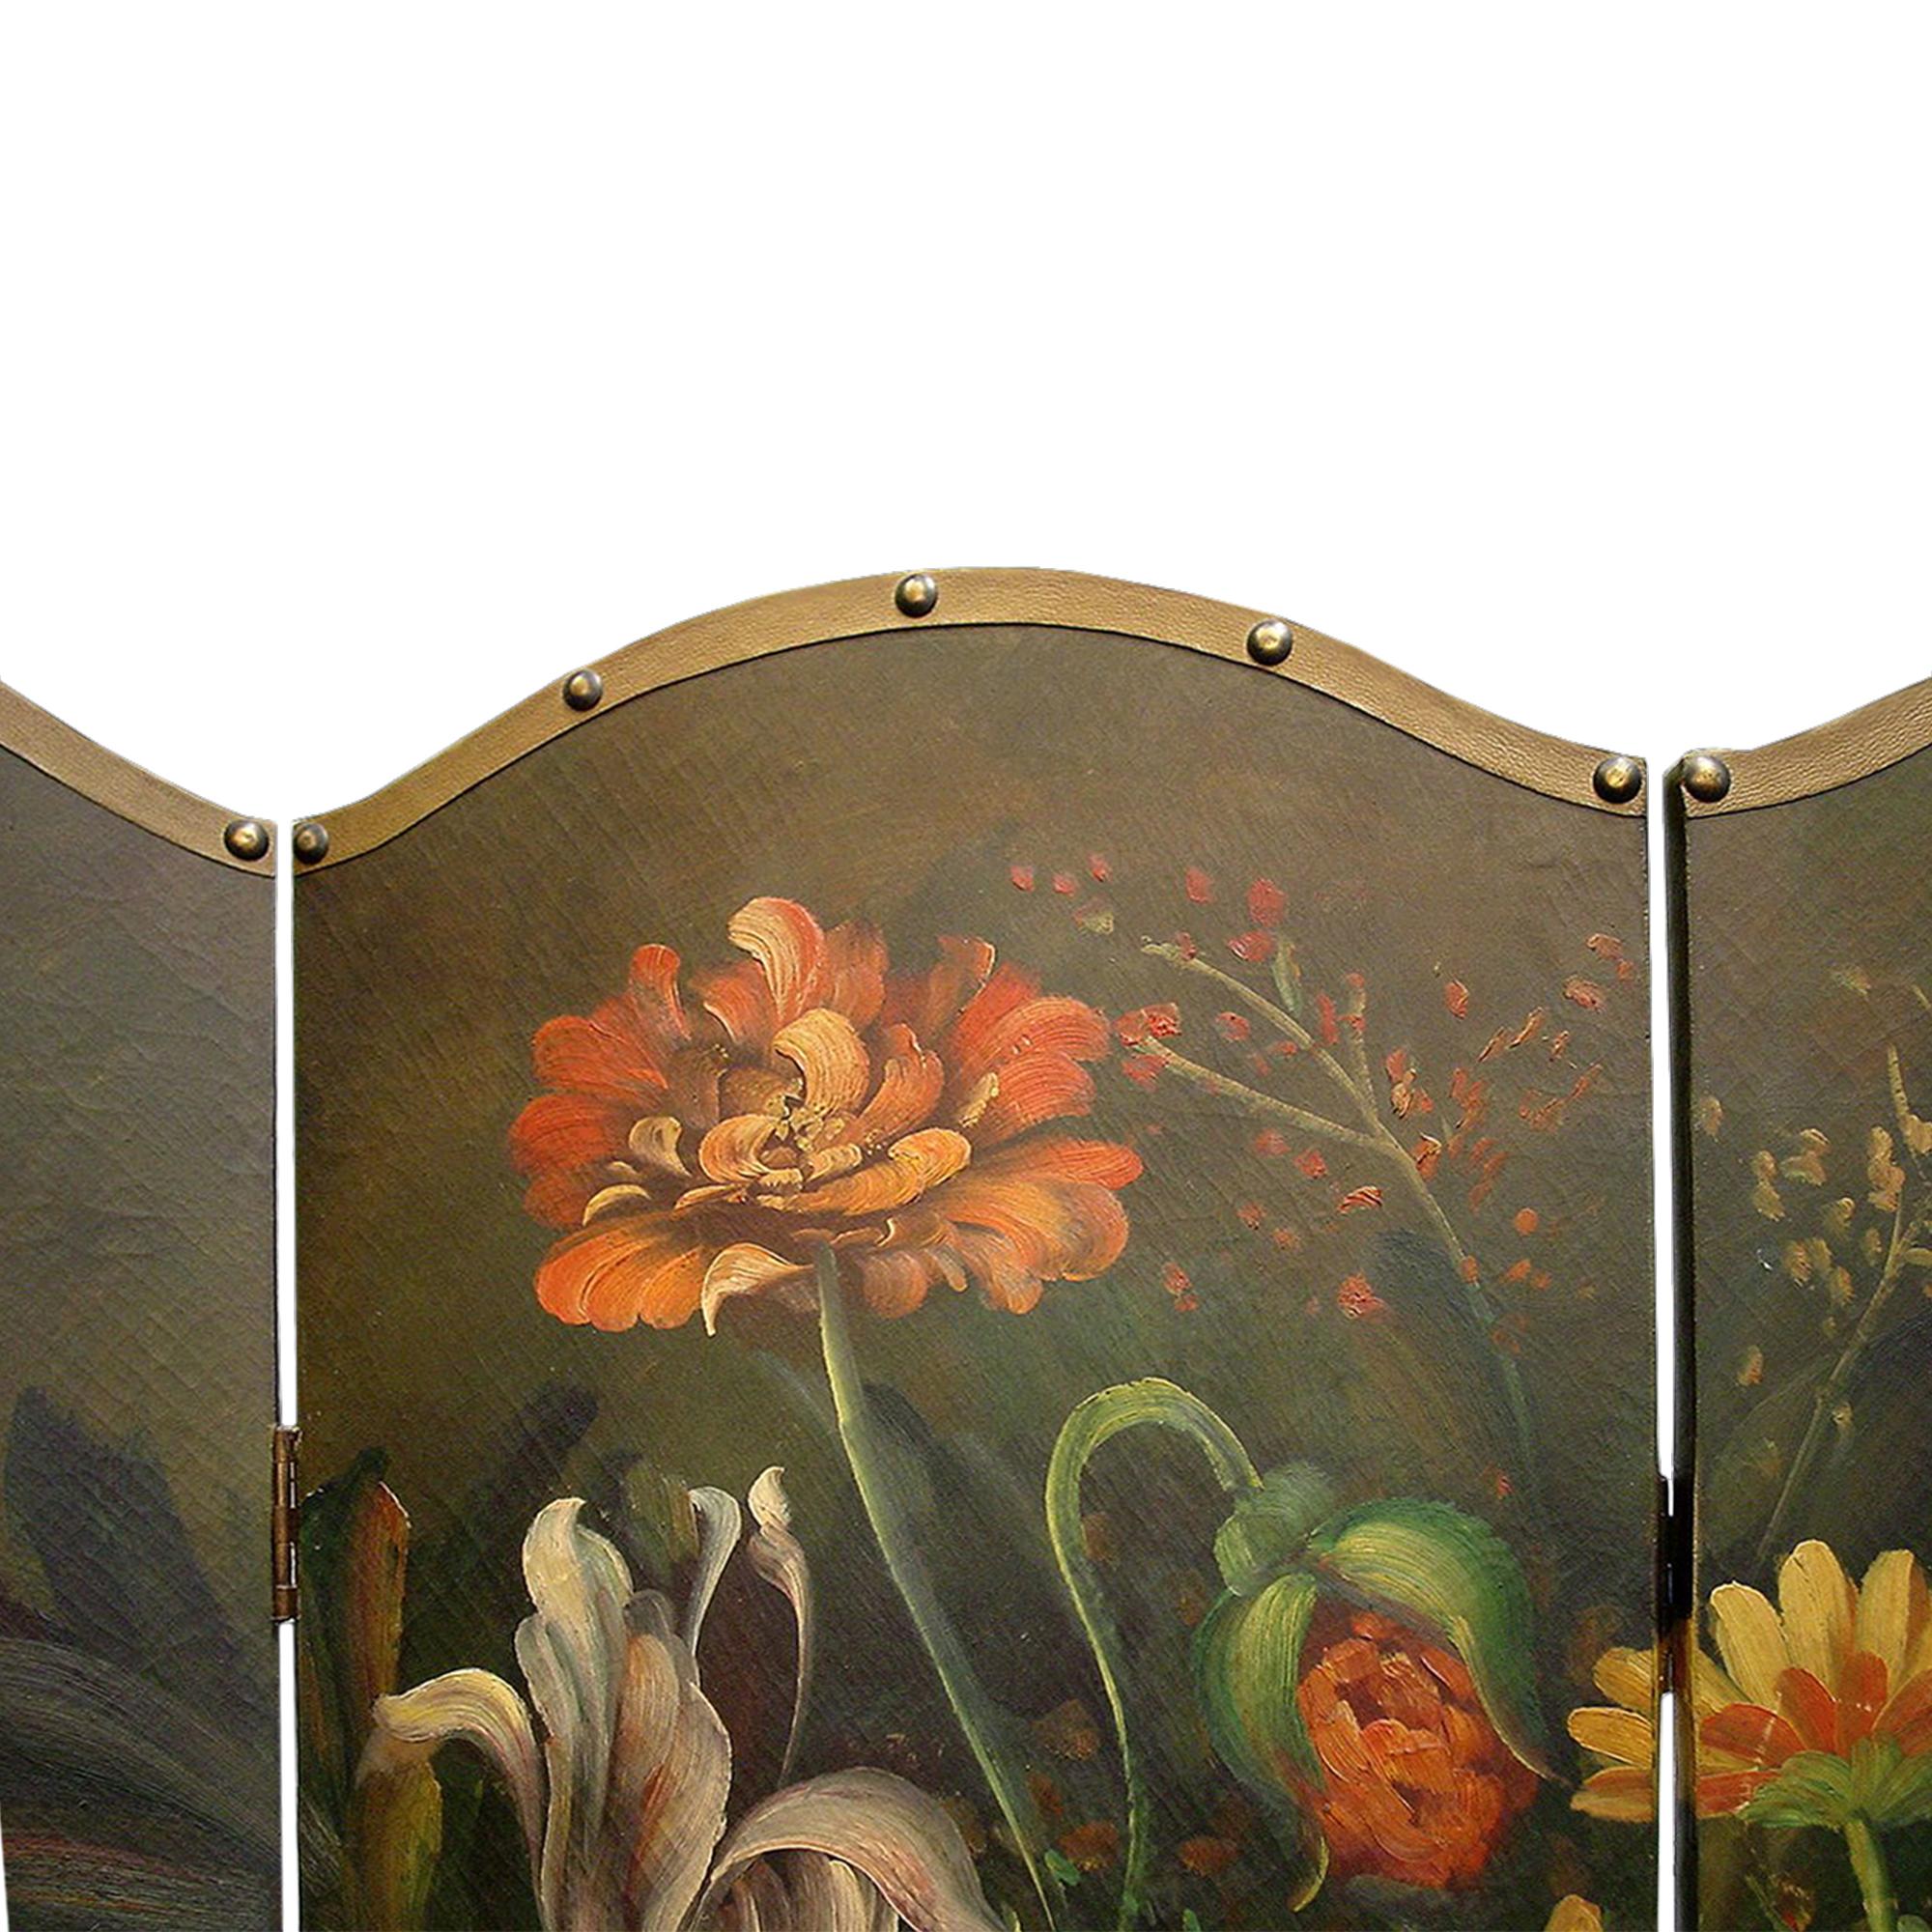 A very decorative French four-panel painted screen. The four painted panels are bordered by antique nails over brown leather trim. The whole is hand painted showing a large urn on top of a table with a very stunning bouquet of colorful flowers